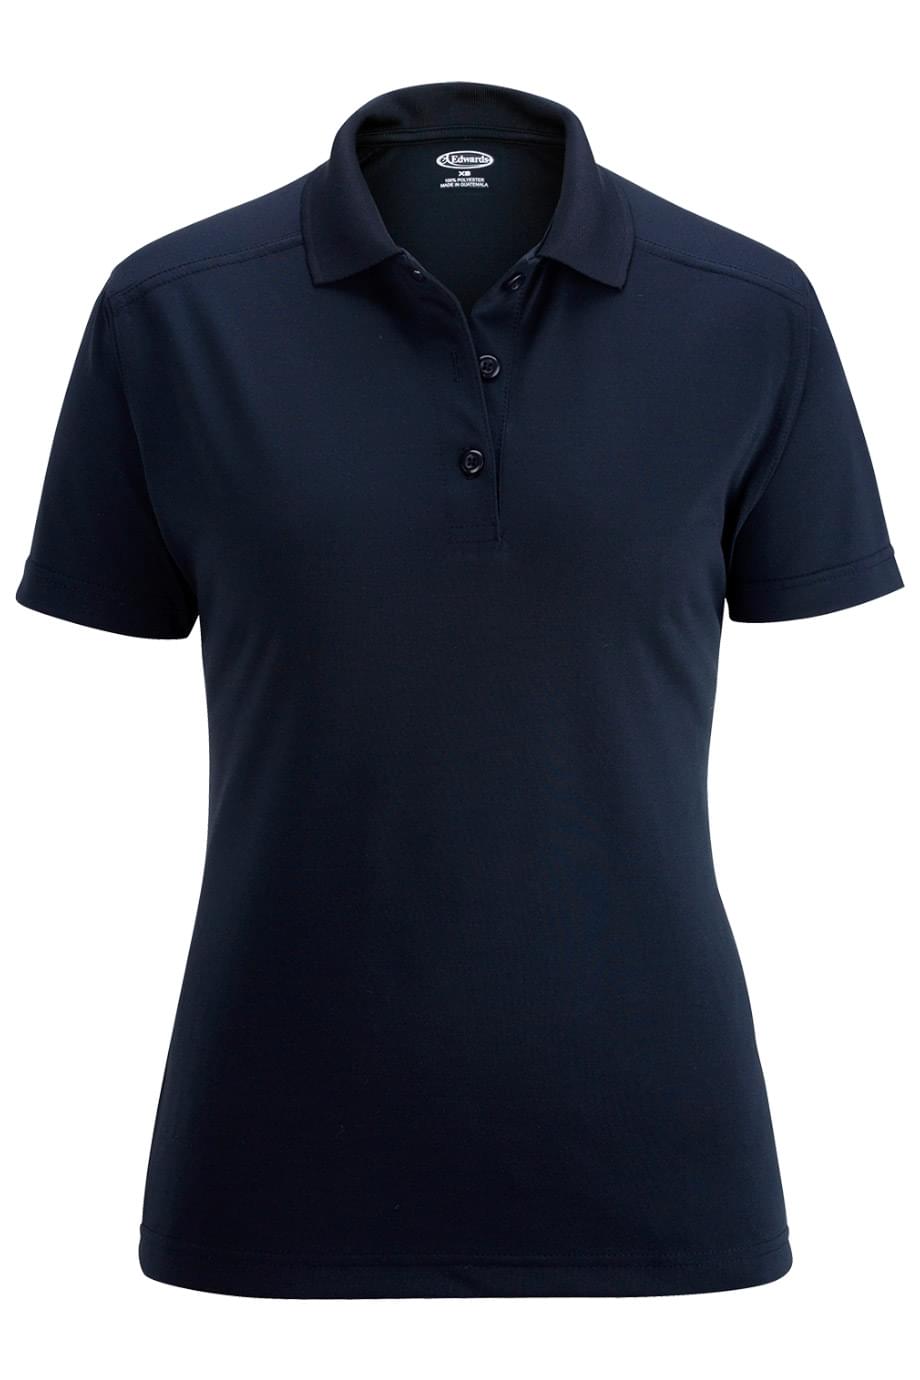 Edwards Snag-Proof Polo 5512 for Women Navy